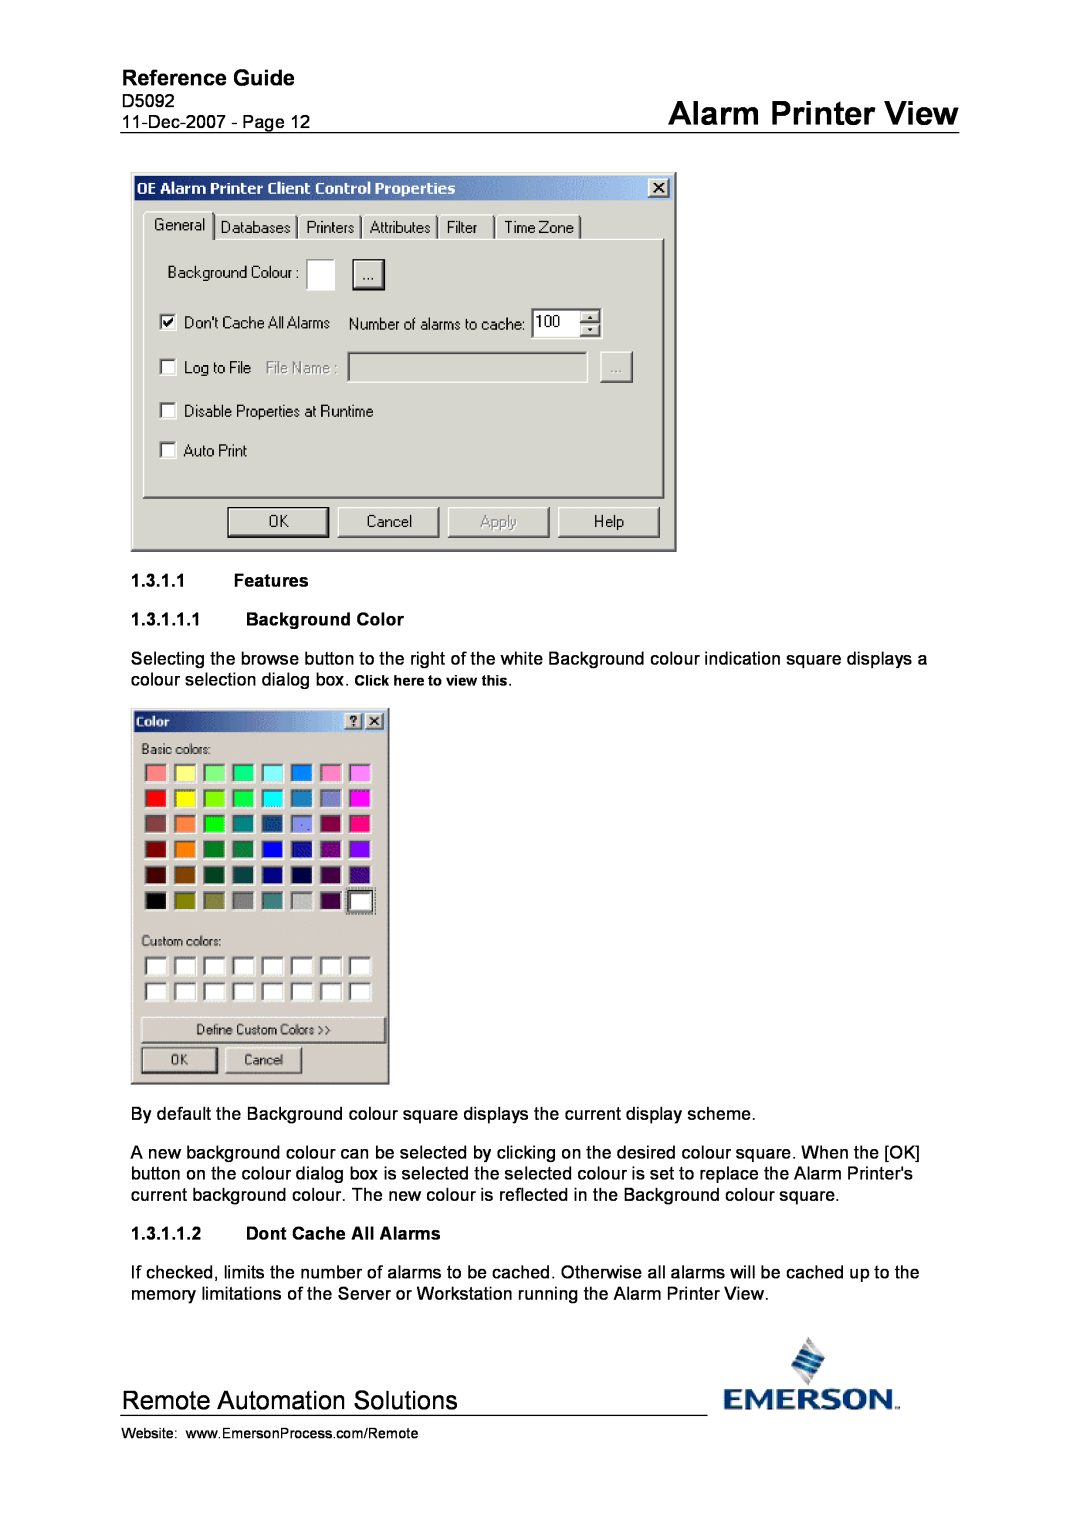 Emerson Process Management D5092 manual Features 1.3.1.1.1 Background Color, Dont Cache All Alarms, Alarm Printer View 